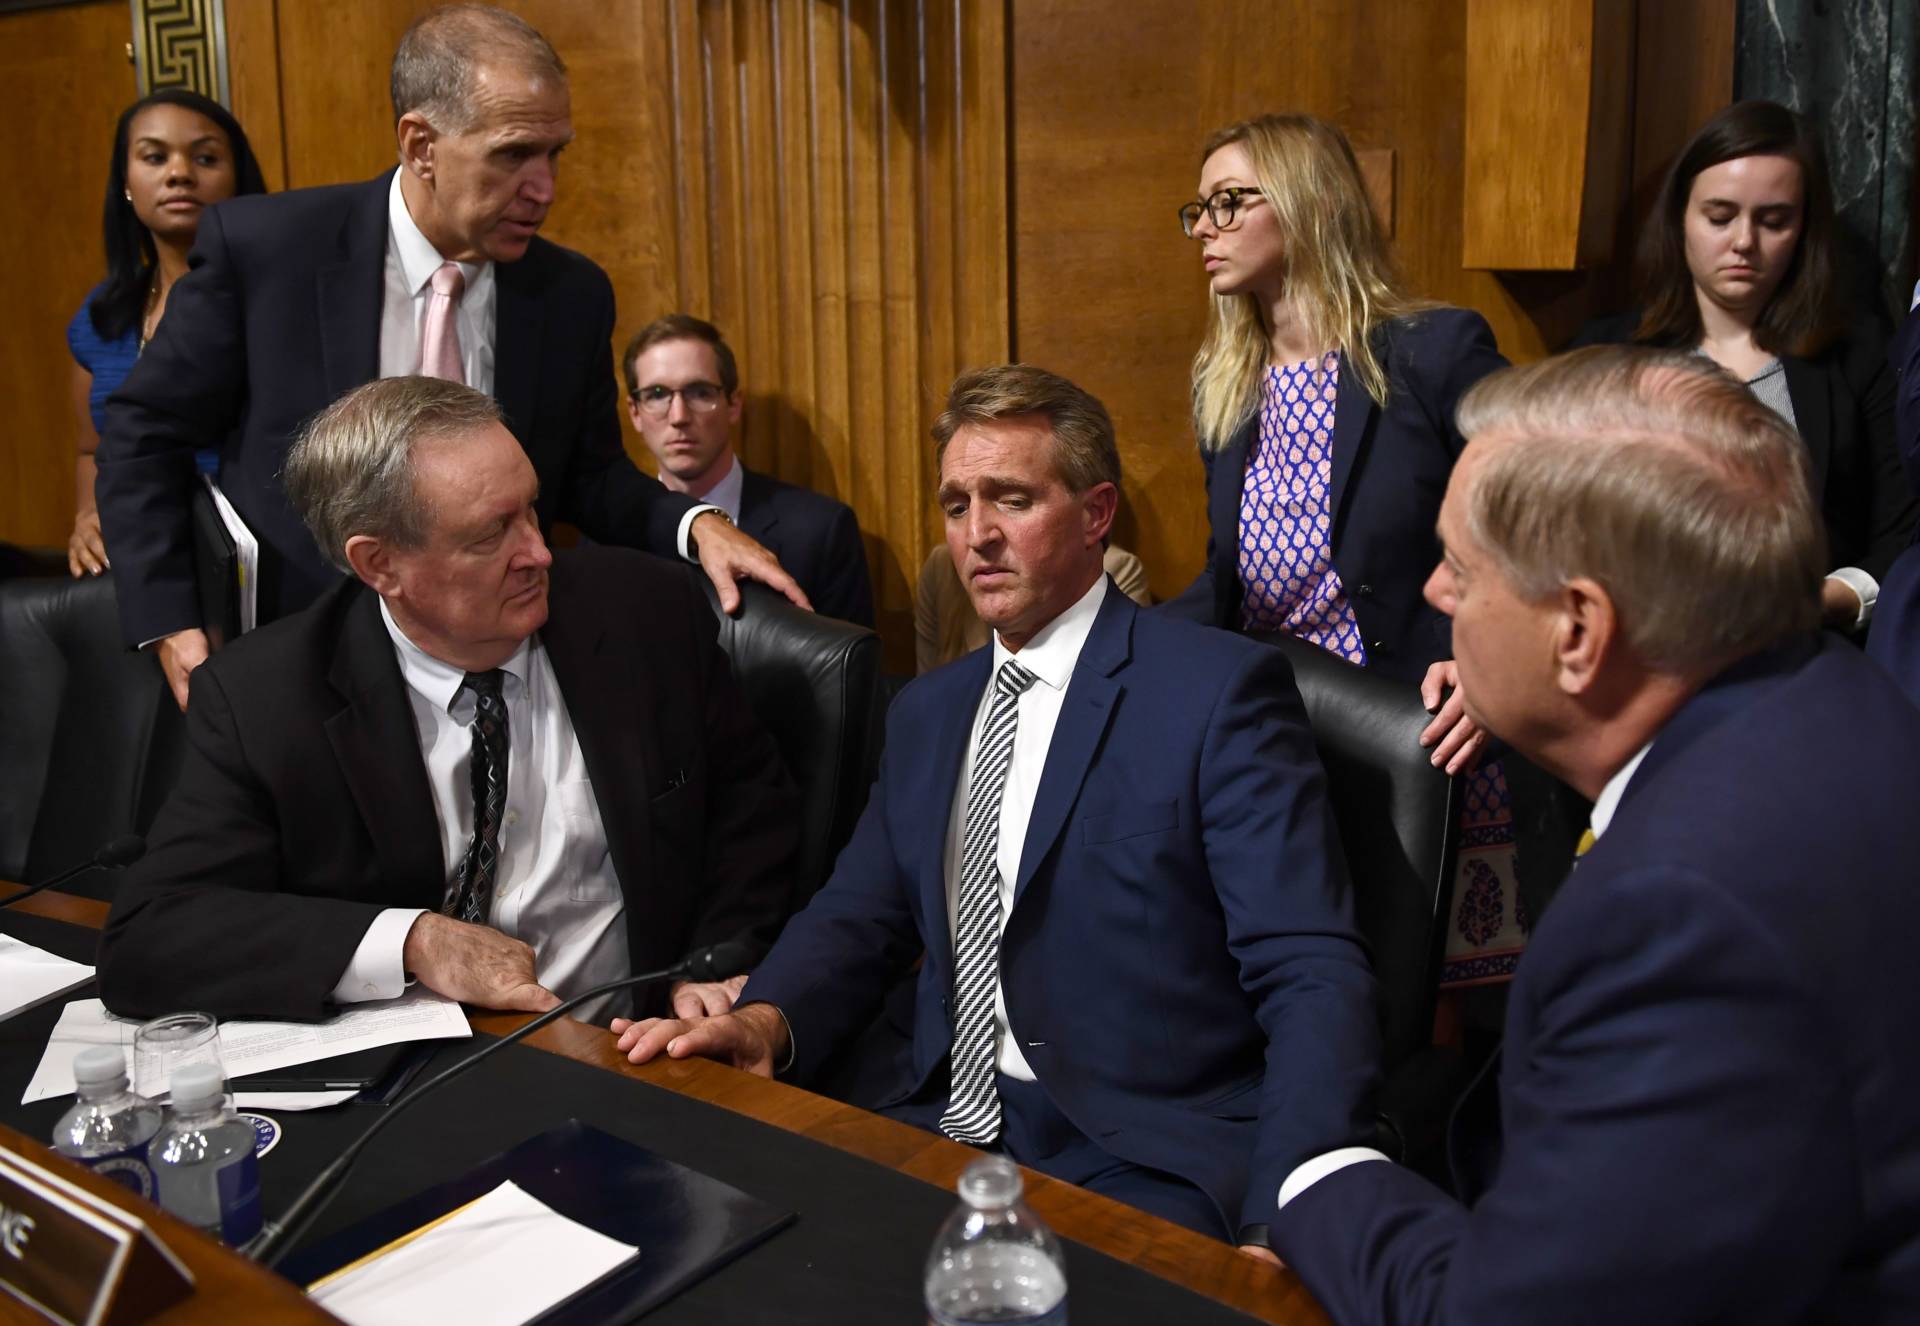 Senate Judiciary Committee member Sen. Jeff Flake (R-AZ) speaks with committee colleagues during a hearing on Capitol Hill in Washington, DC on Sept. 28, 2018 on the nomination of Brett M. Kavanaugh to be an associate justice of the Supreme Court of the United States. Brendan Smialowski/AFP/Getty Images